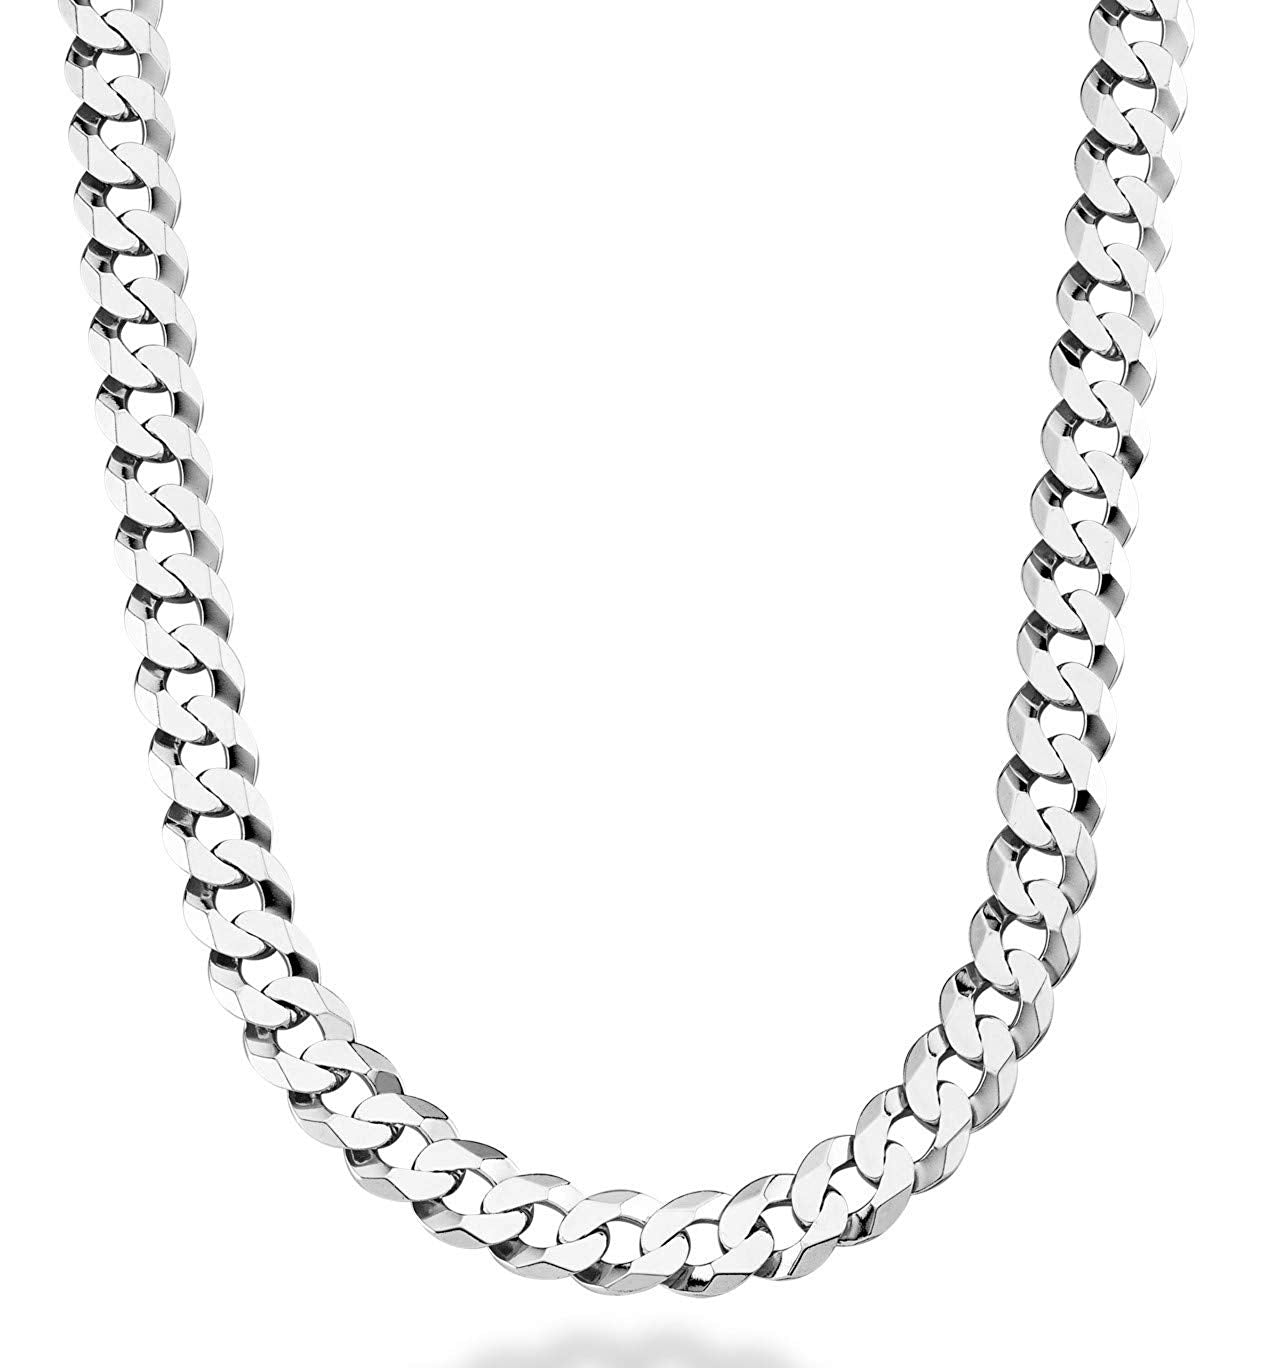 Sterling Silver Rhodium Plated Curb Chain Necklace, 13.5mm, 24" fine designer jewelry for men and women